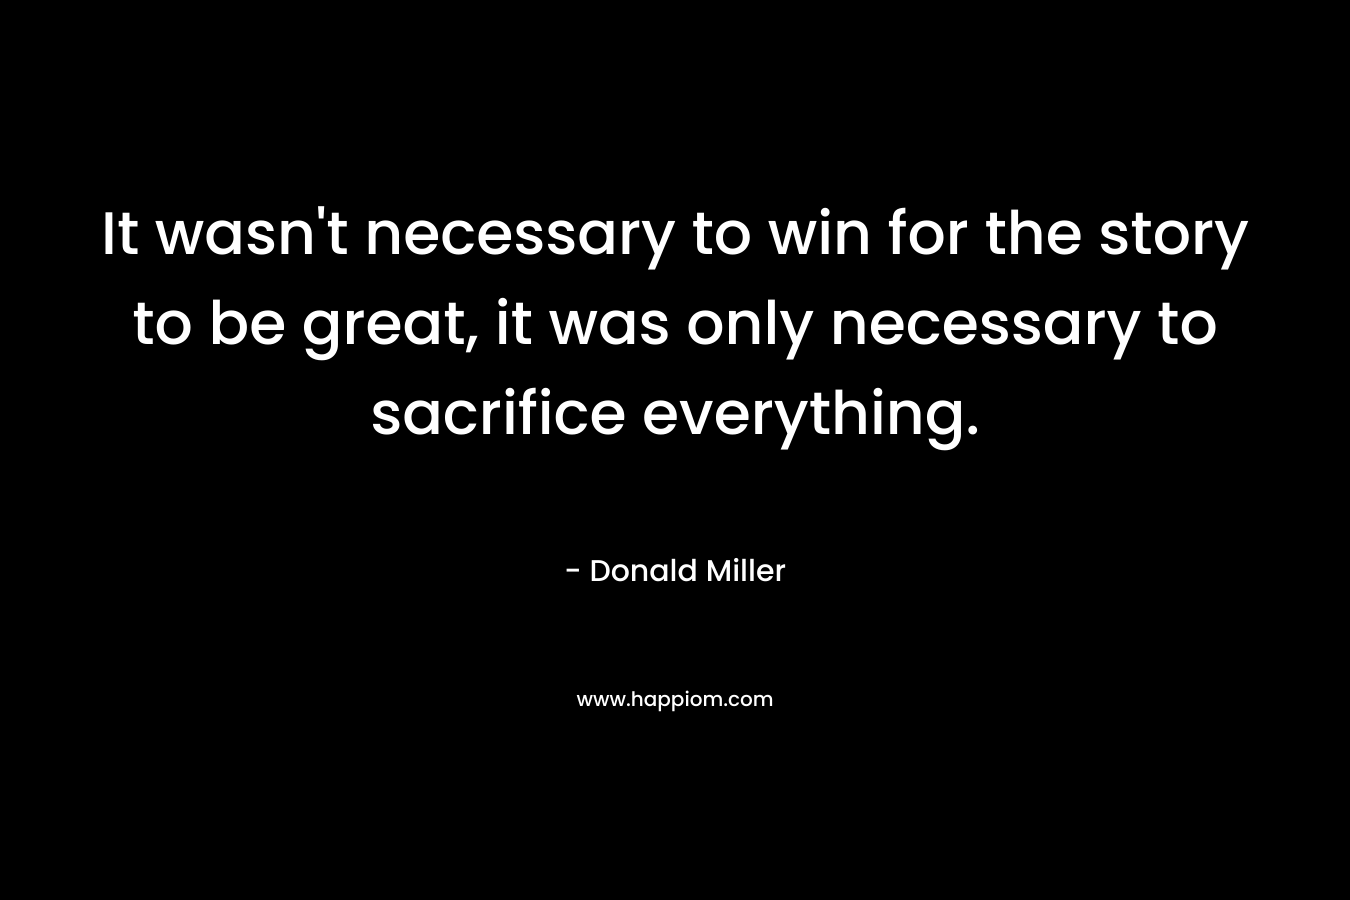 It wasn't necessary to win for the story to be great, it was only necessary to sacrifice everything.